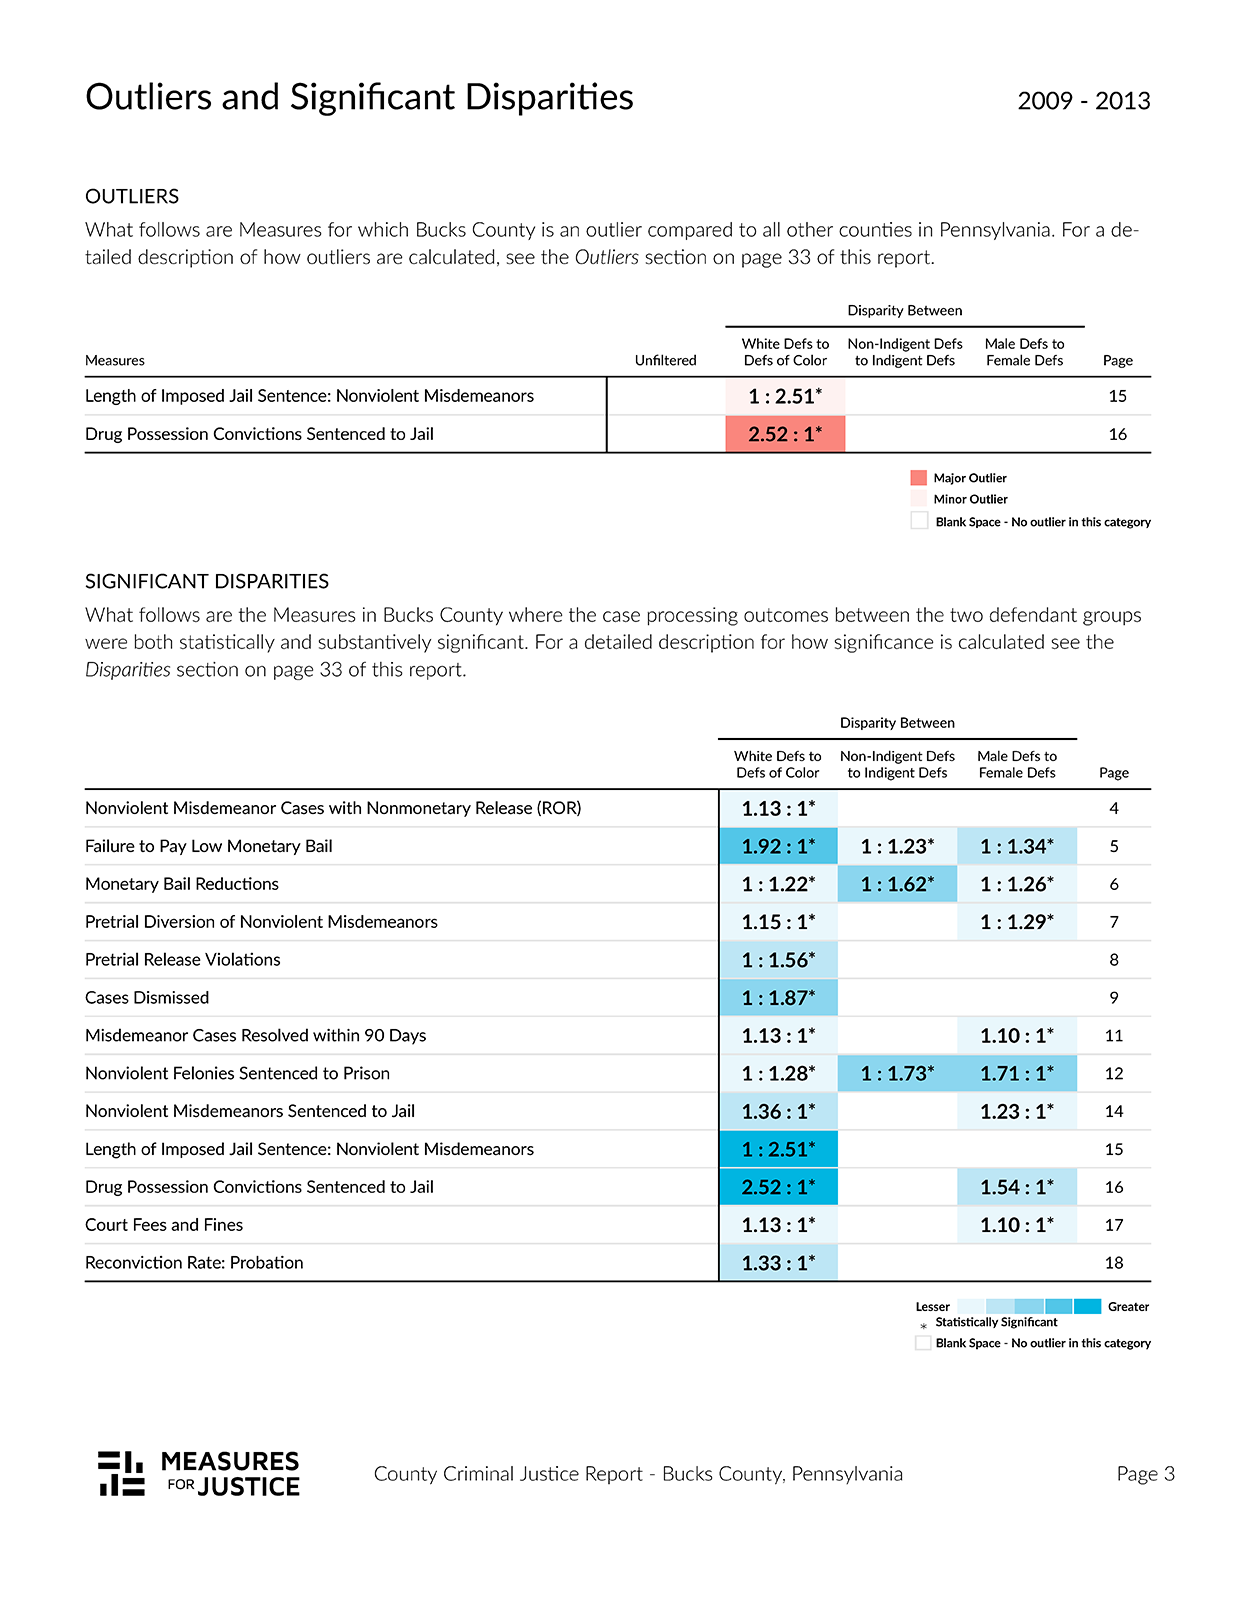 Screenshot of report showing significant disparities section